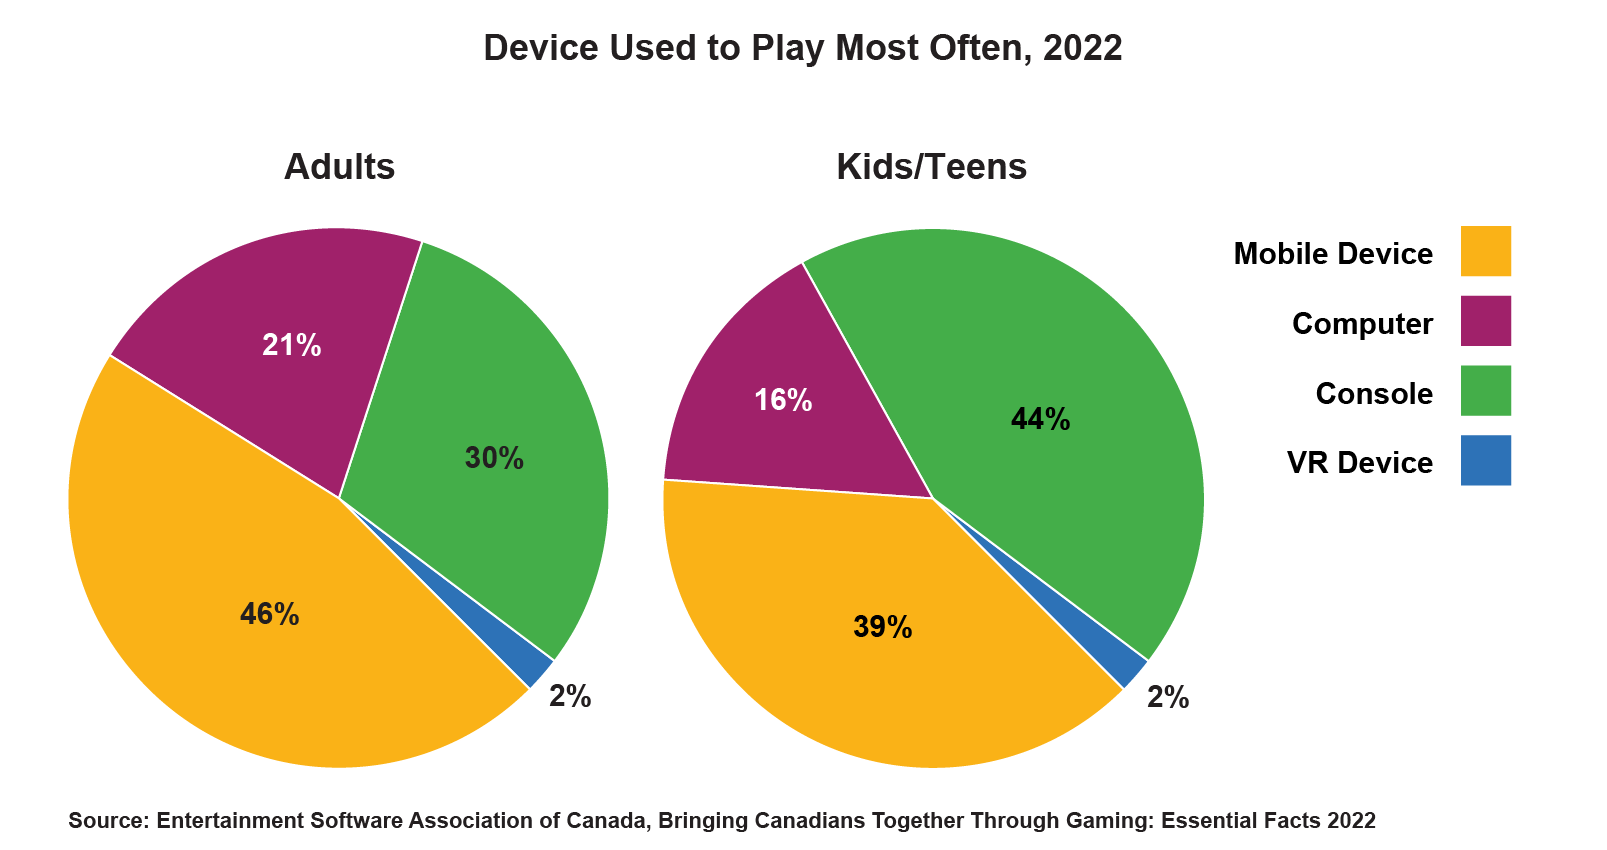 A pie chart depicting the devices that adults use most often for gaming purposes in Canada. The most commonly used device is the mobile device or smartphone (47%), followed by consoles (30%), computers (21%), and VR devices (2%). Note: total may not add up to 100% due to rounding. 